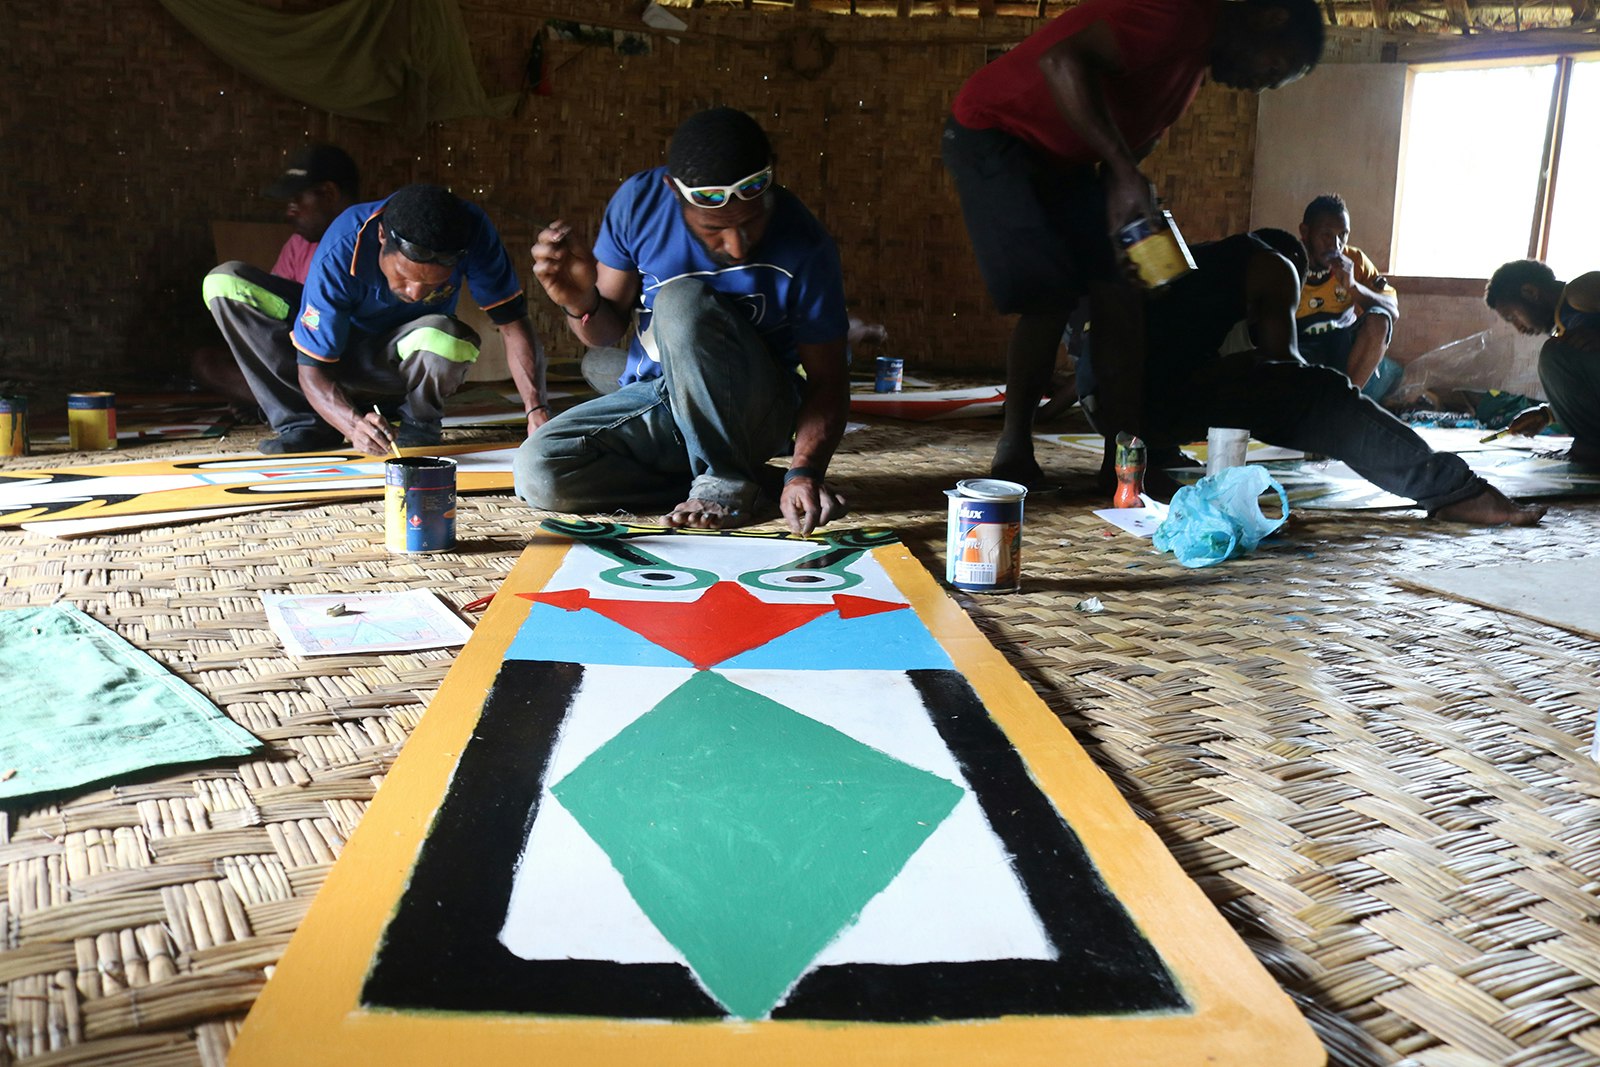 A group of dark-skinned Pasifika men are crouched over sheets on plywood on the floor of a grass hut, painting colourful shapes on each one.